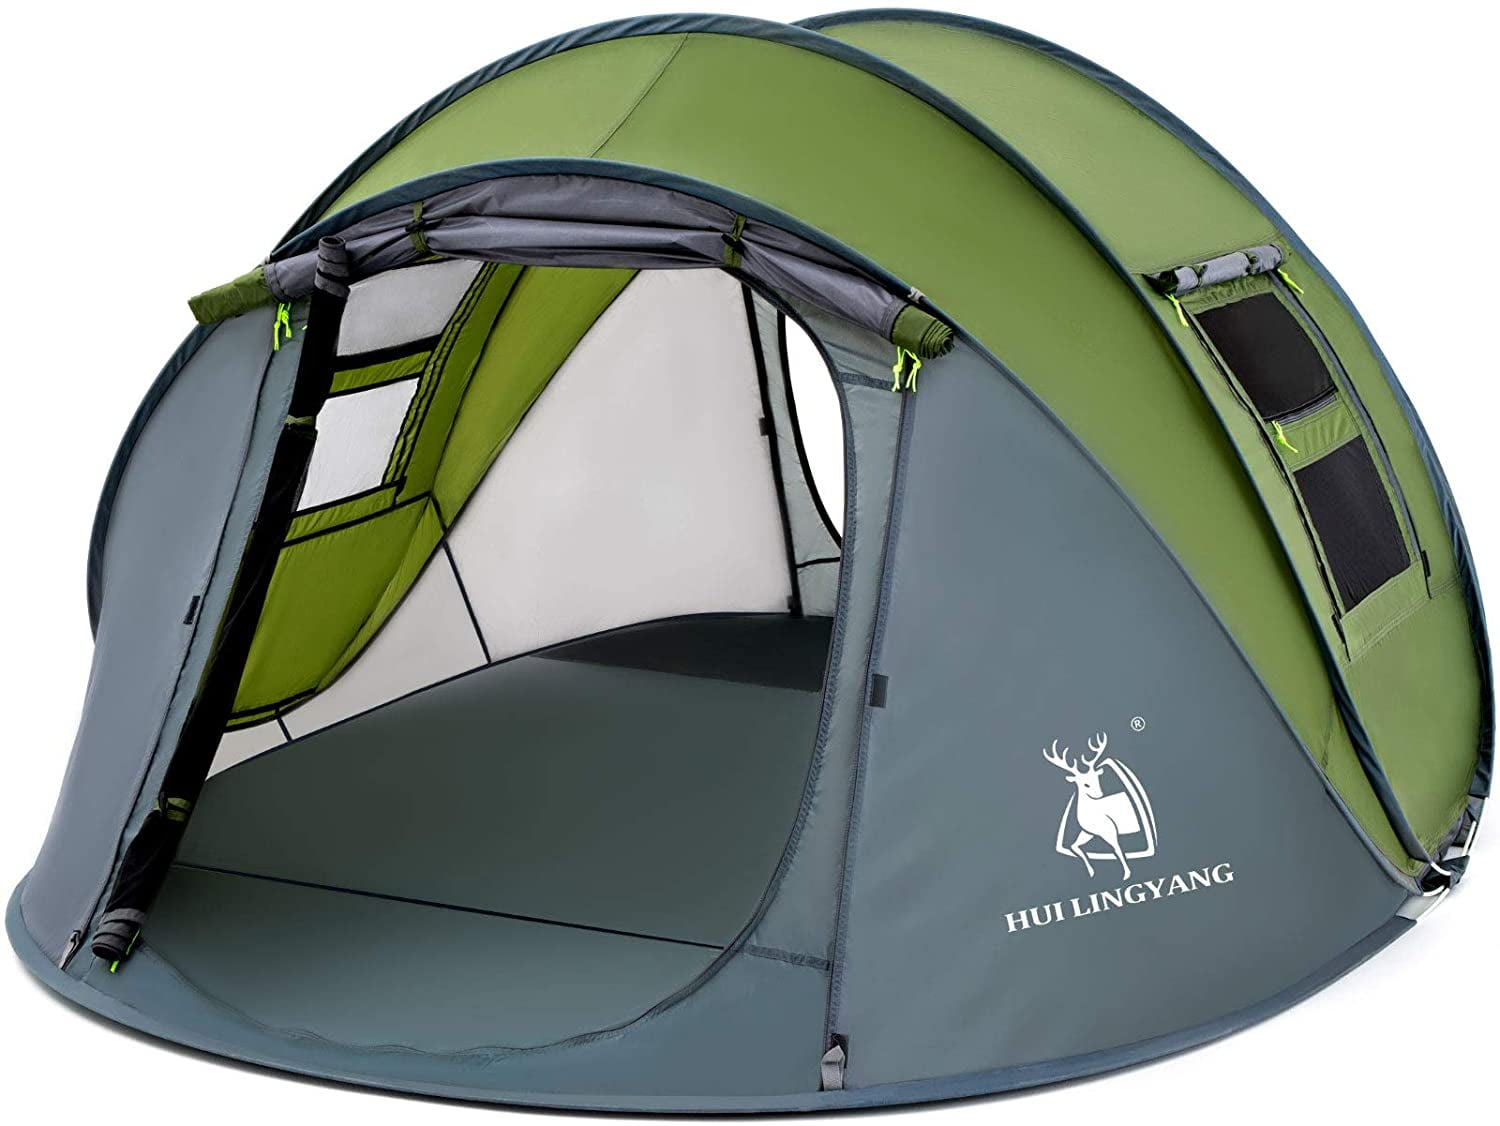 4 Person Easy Up Tent,9.5'X6.6'X52'',Waterproof, Setup,2 Doors-Instant Family Tents Camping, Hiking & Traveling - Walmart.com